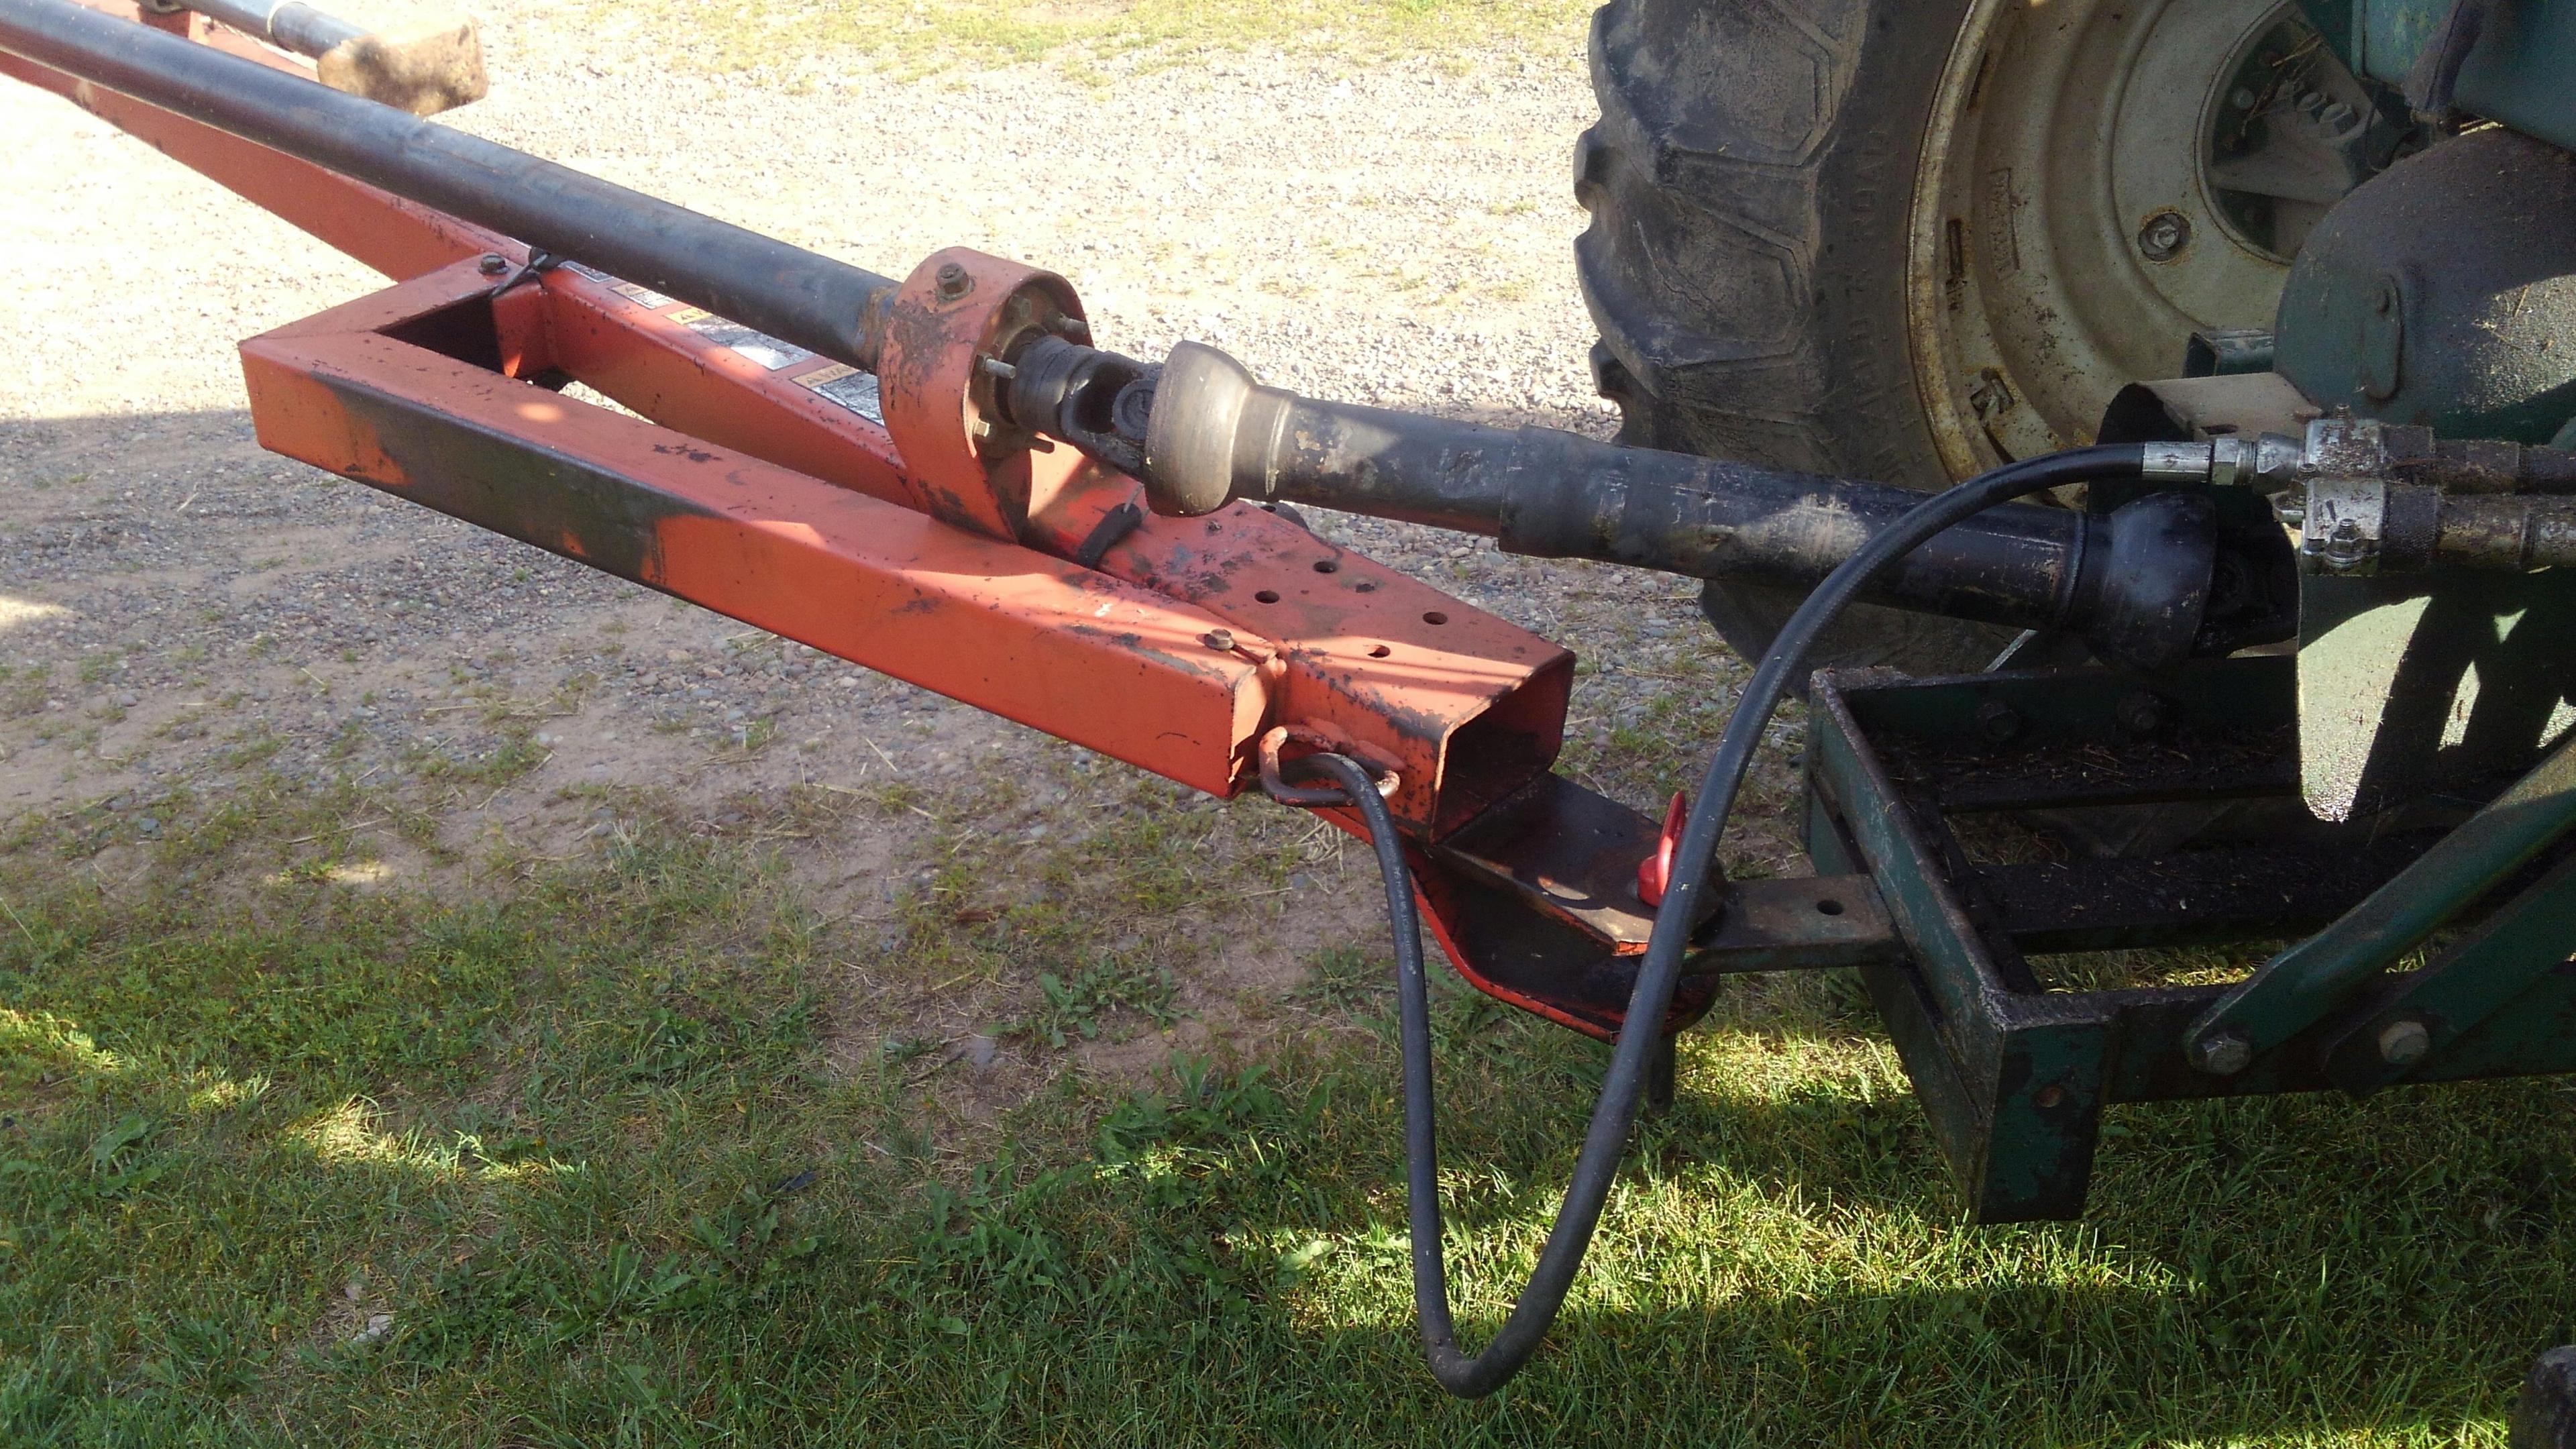 Gehl 2170 haybine. Good working condition. Replaced this season: new sickle